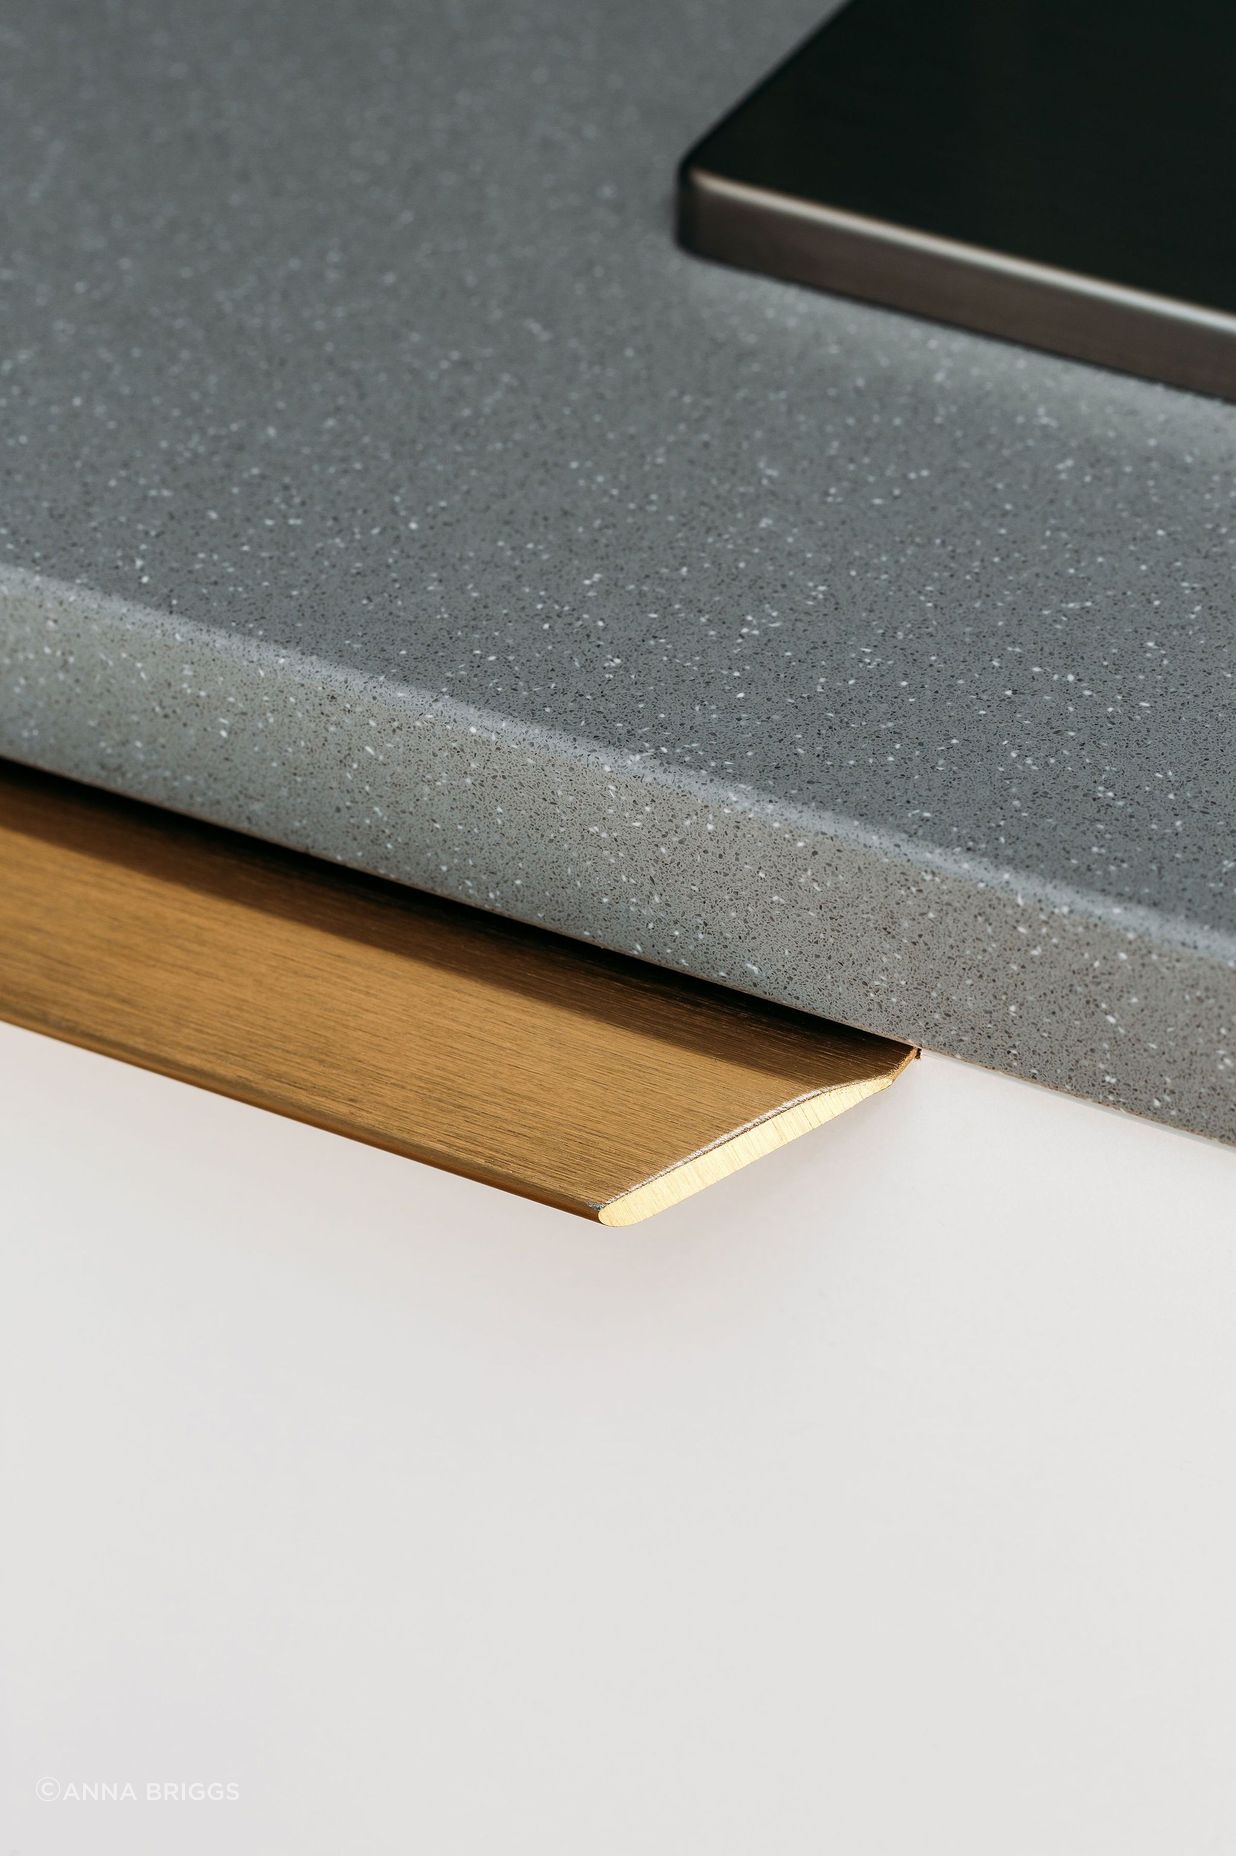 Brass recessed handles sit comfortably under the benchtop.